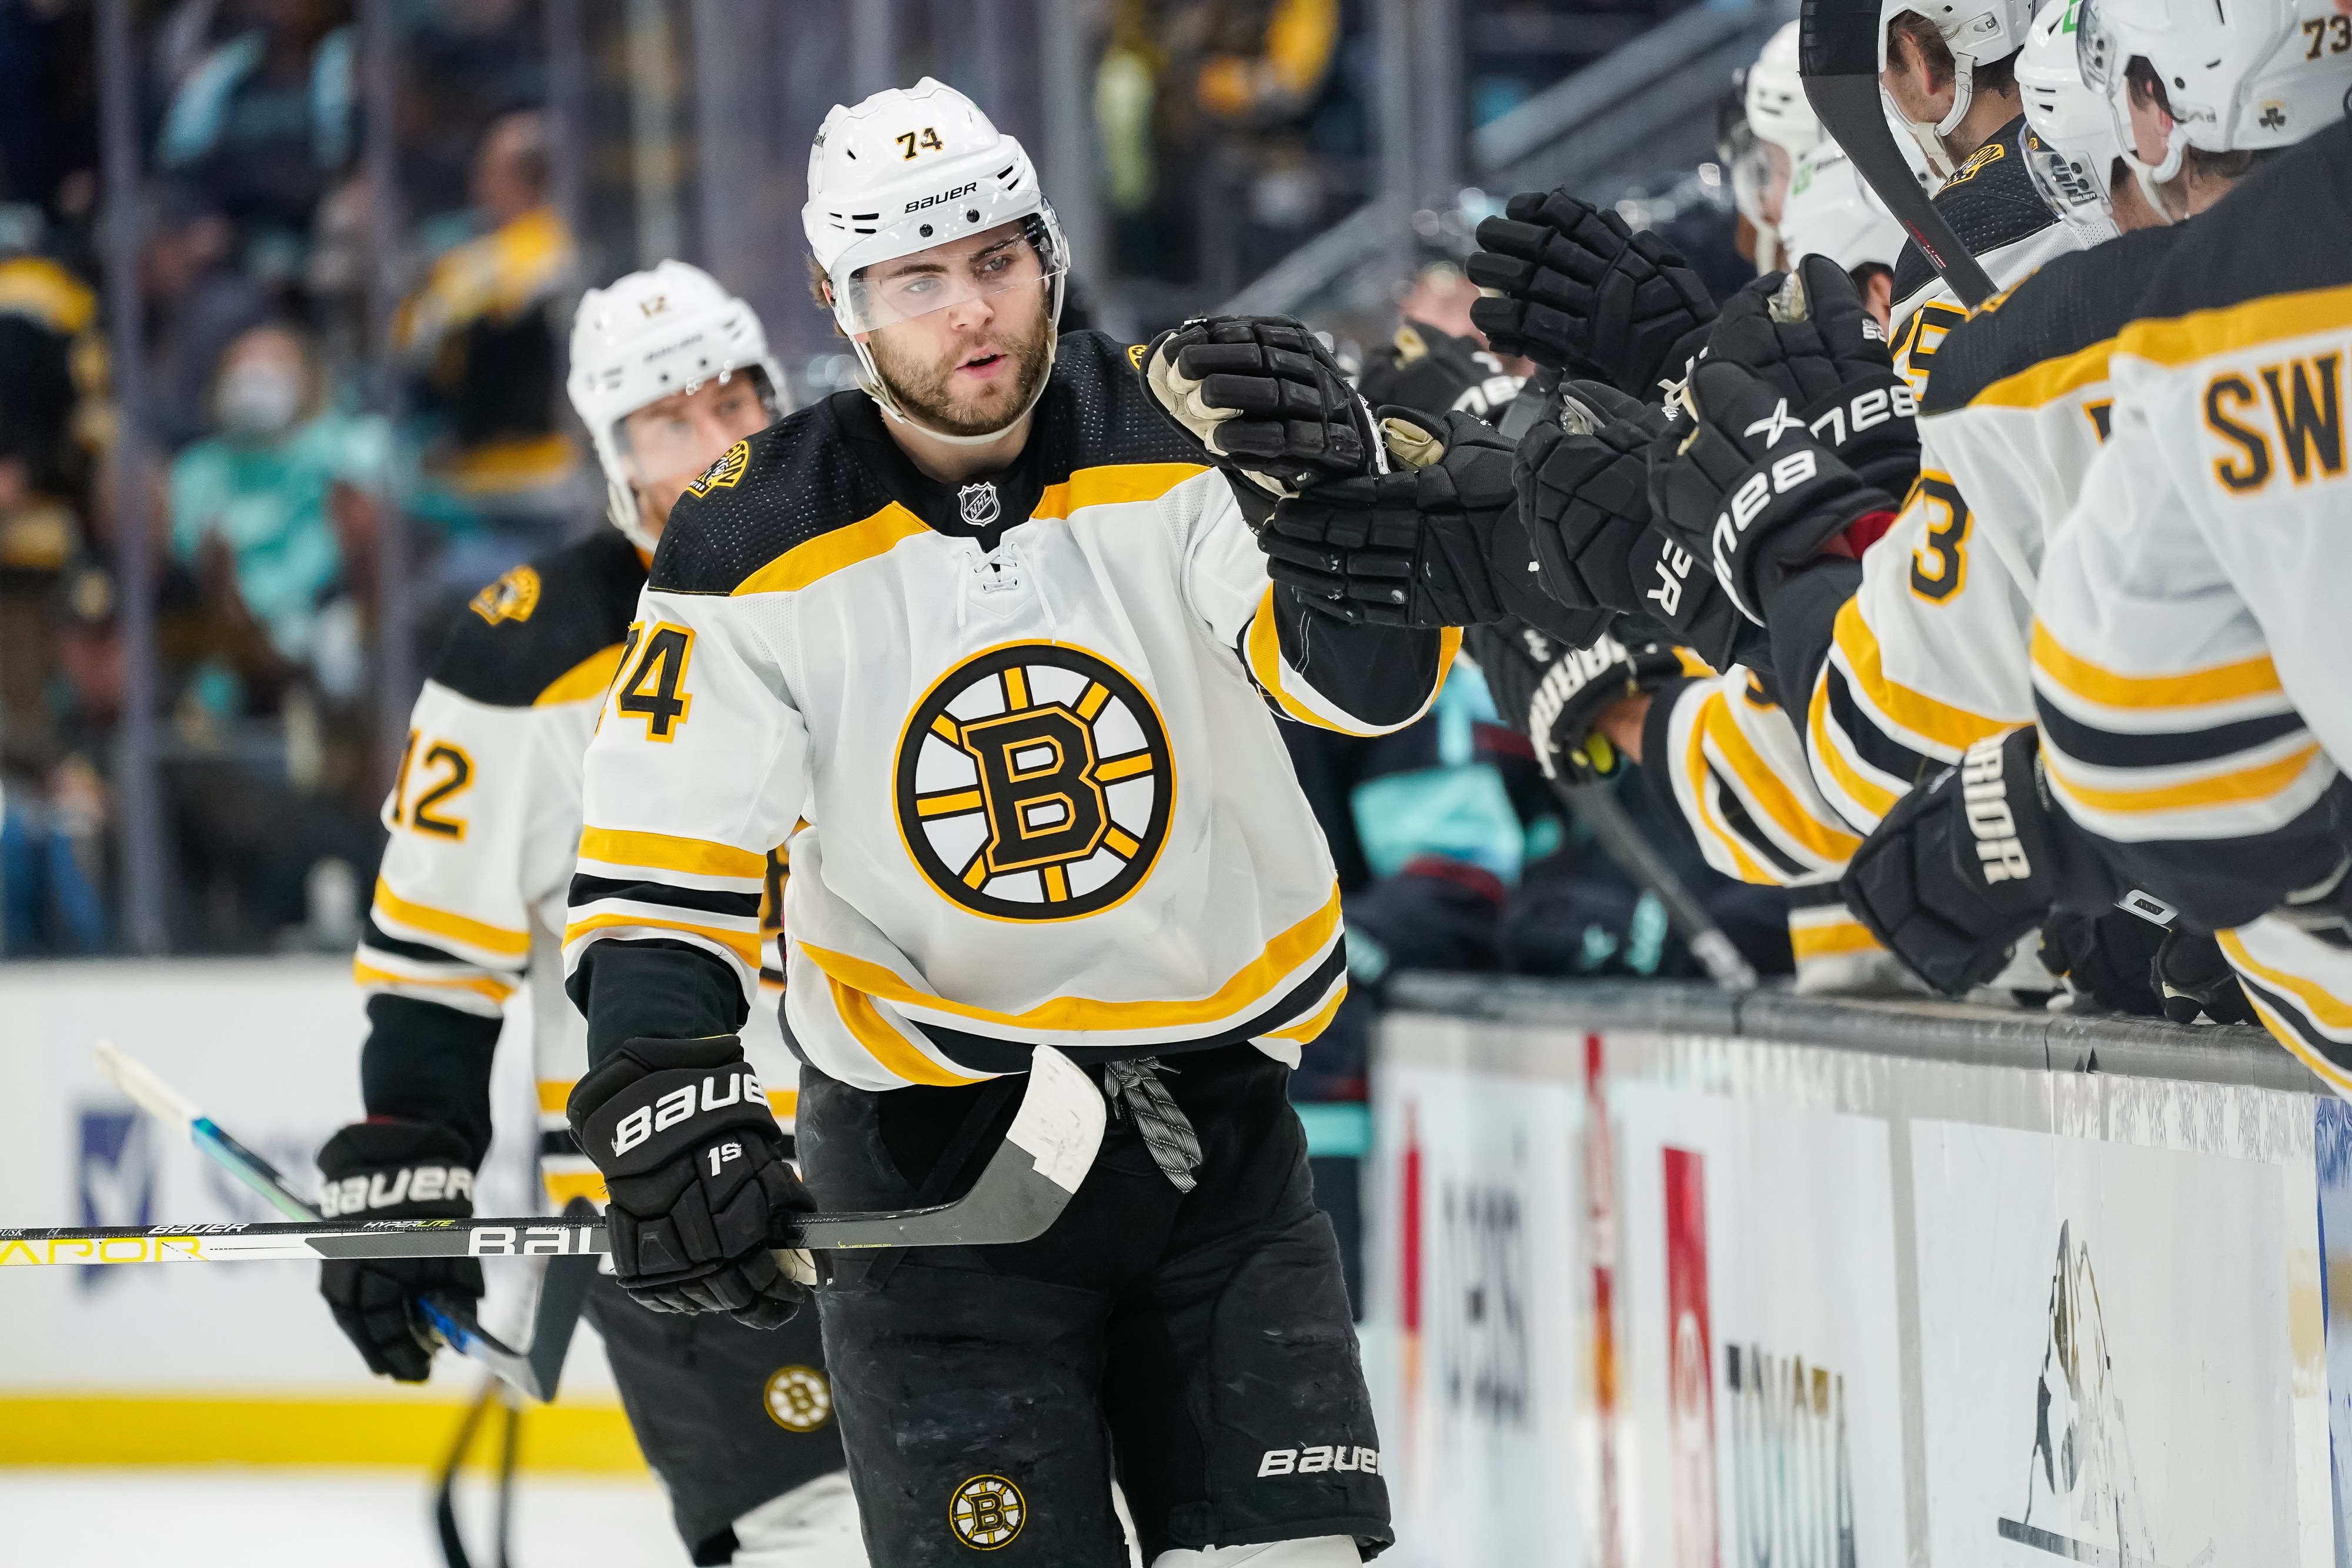 Boston Bruins sign Jake DeBrusk to a two-year contract with a $3.675  million AAV @nhltraderumors.me